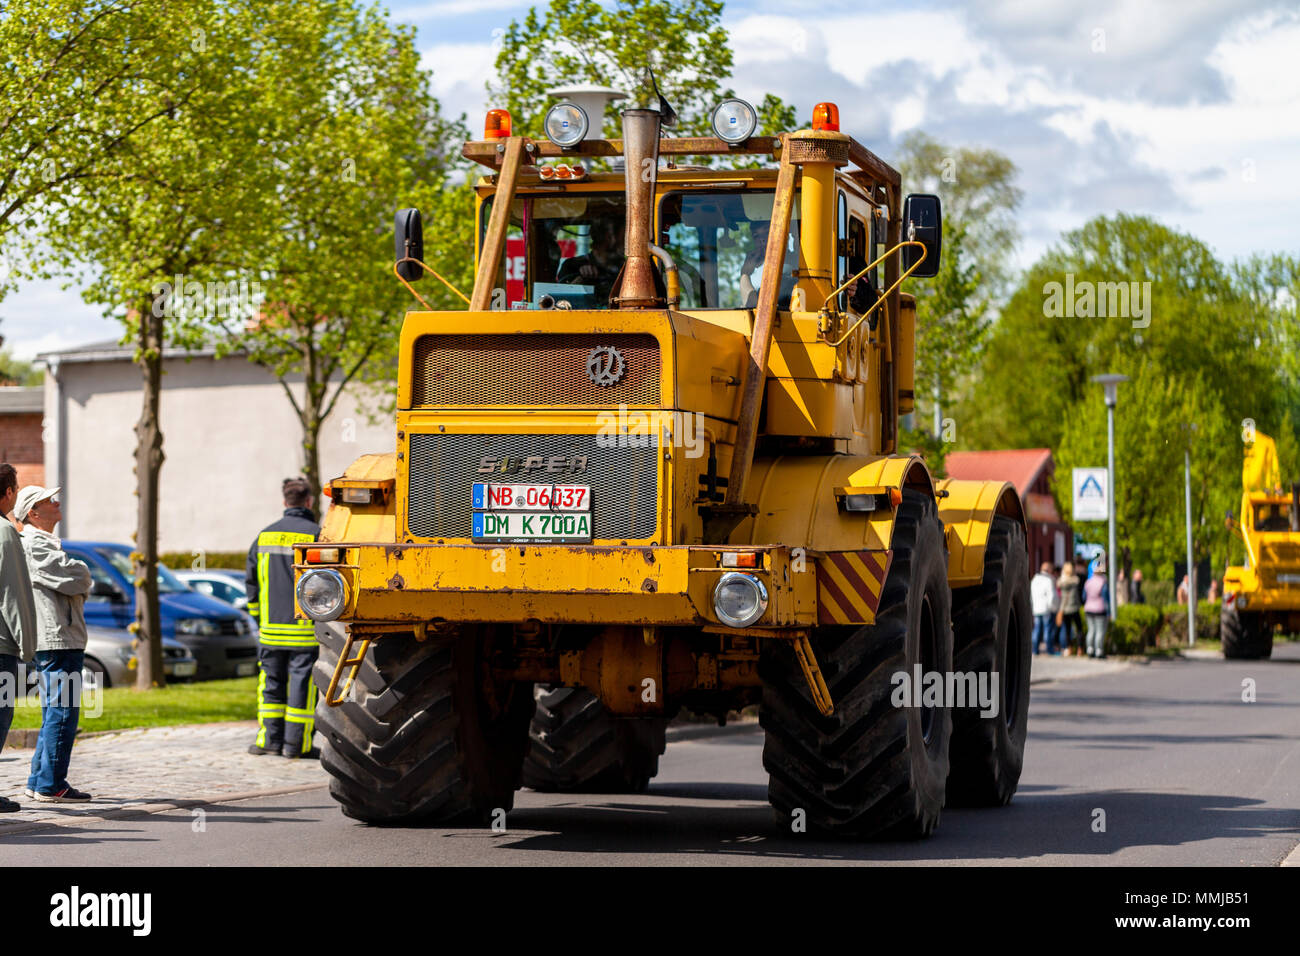 ALTENTREPTOW MECKLENBURG- WEST POMERANIA - MAY 1, 2018: Russian Kirowez K 700 tractor drives on street at an oldtimer show Stock Photo